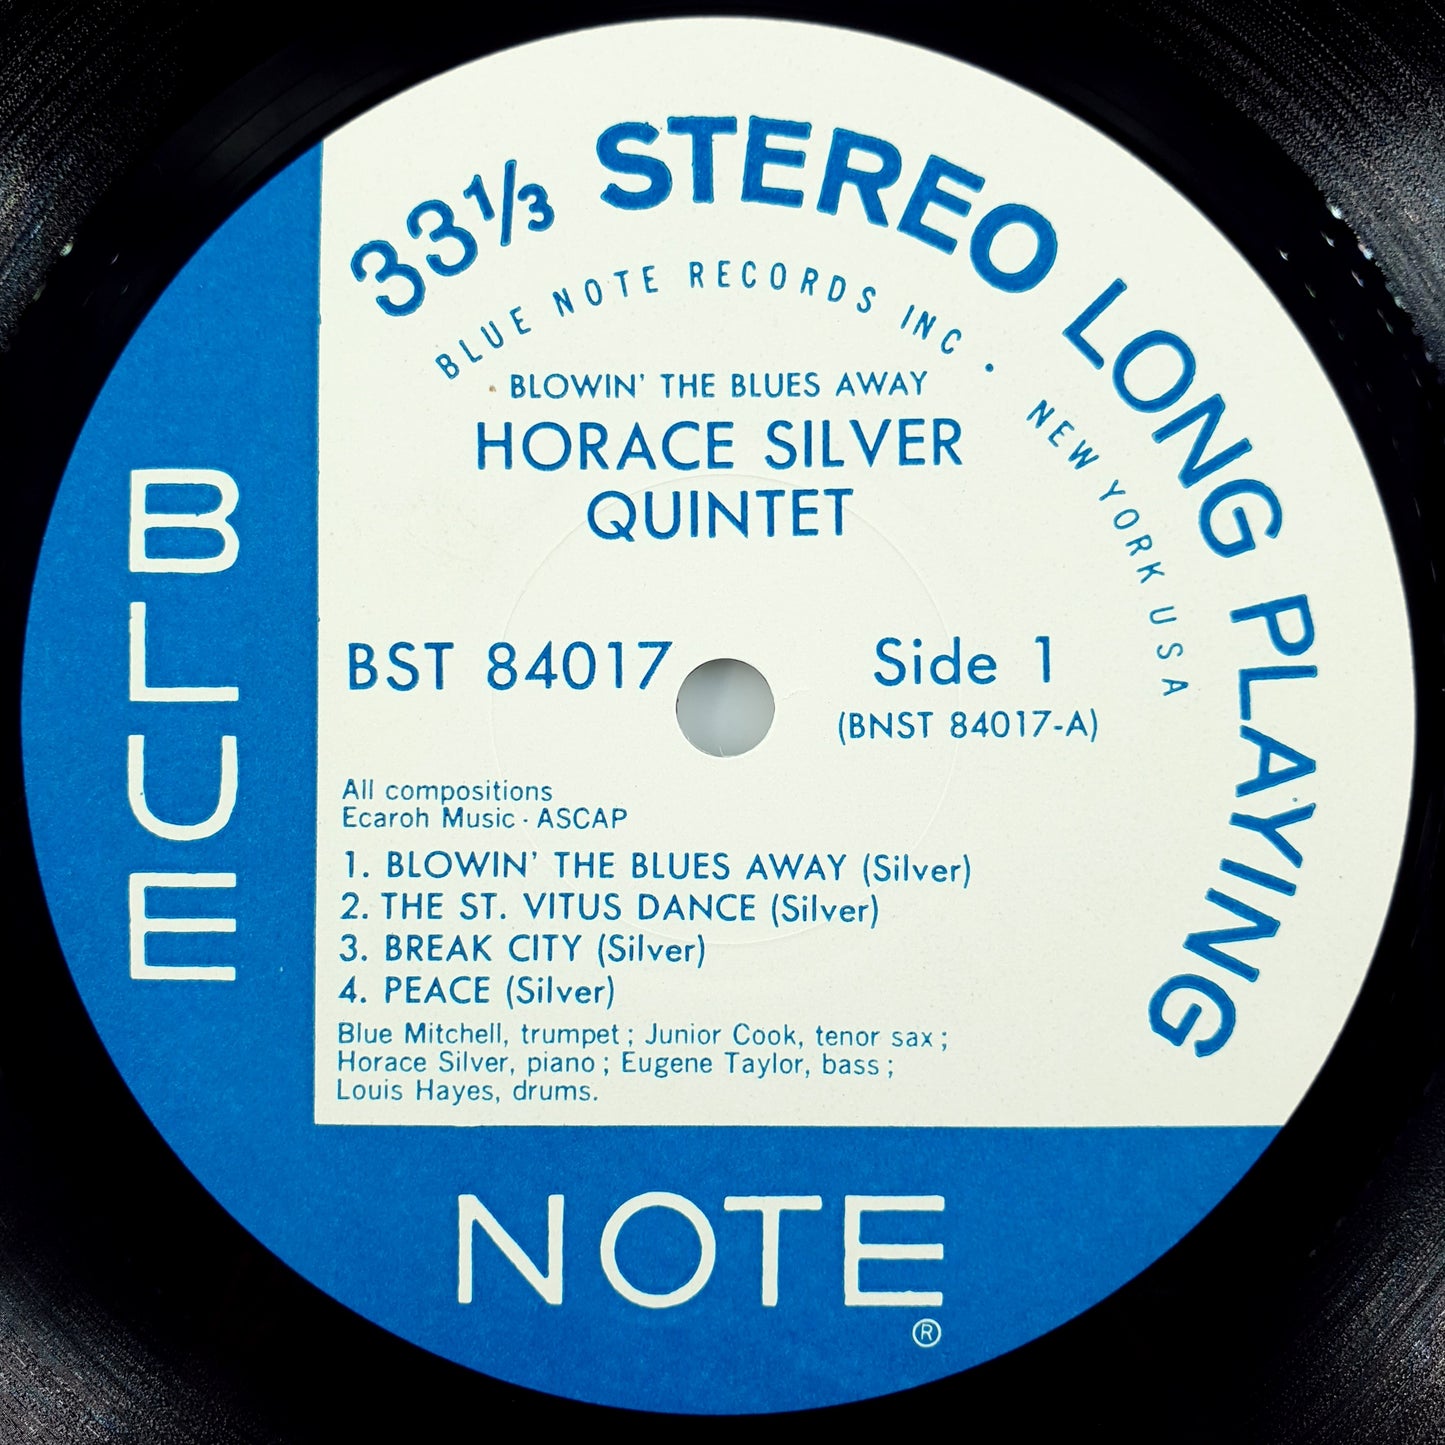 The Horace Silver Quintet & The Horace Silver Trio – Blowin' The Blues Away